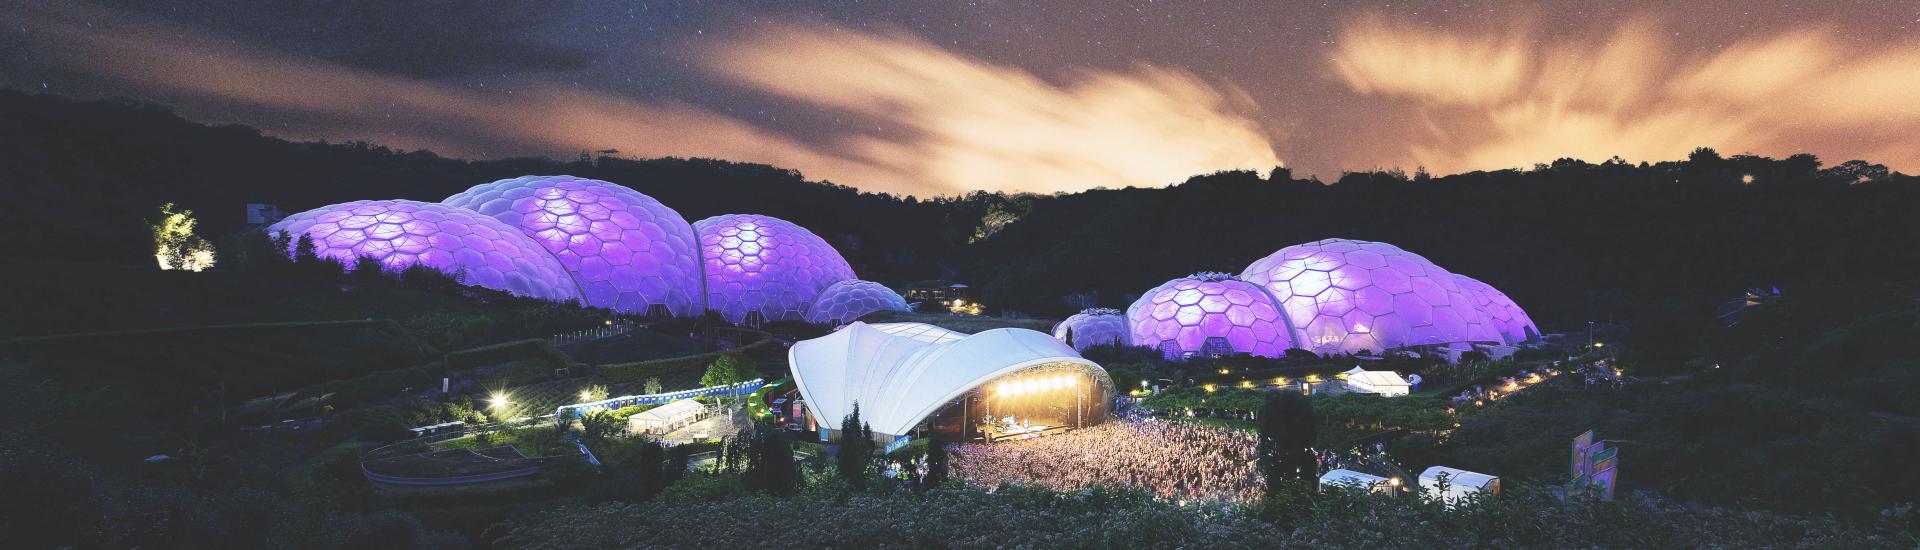 Wide view of a Sessions concert under a starry sky at Eden with the Biomes lit up purple